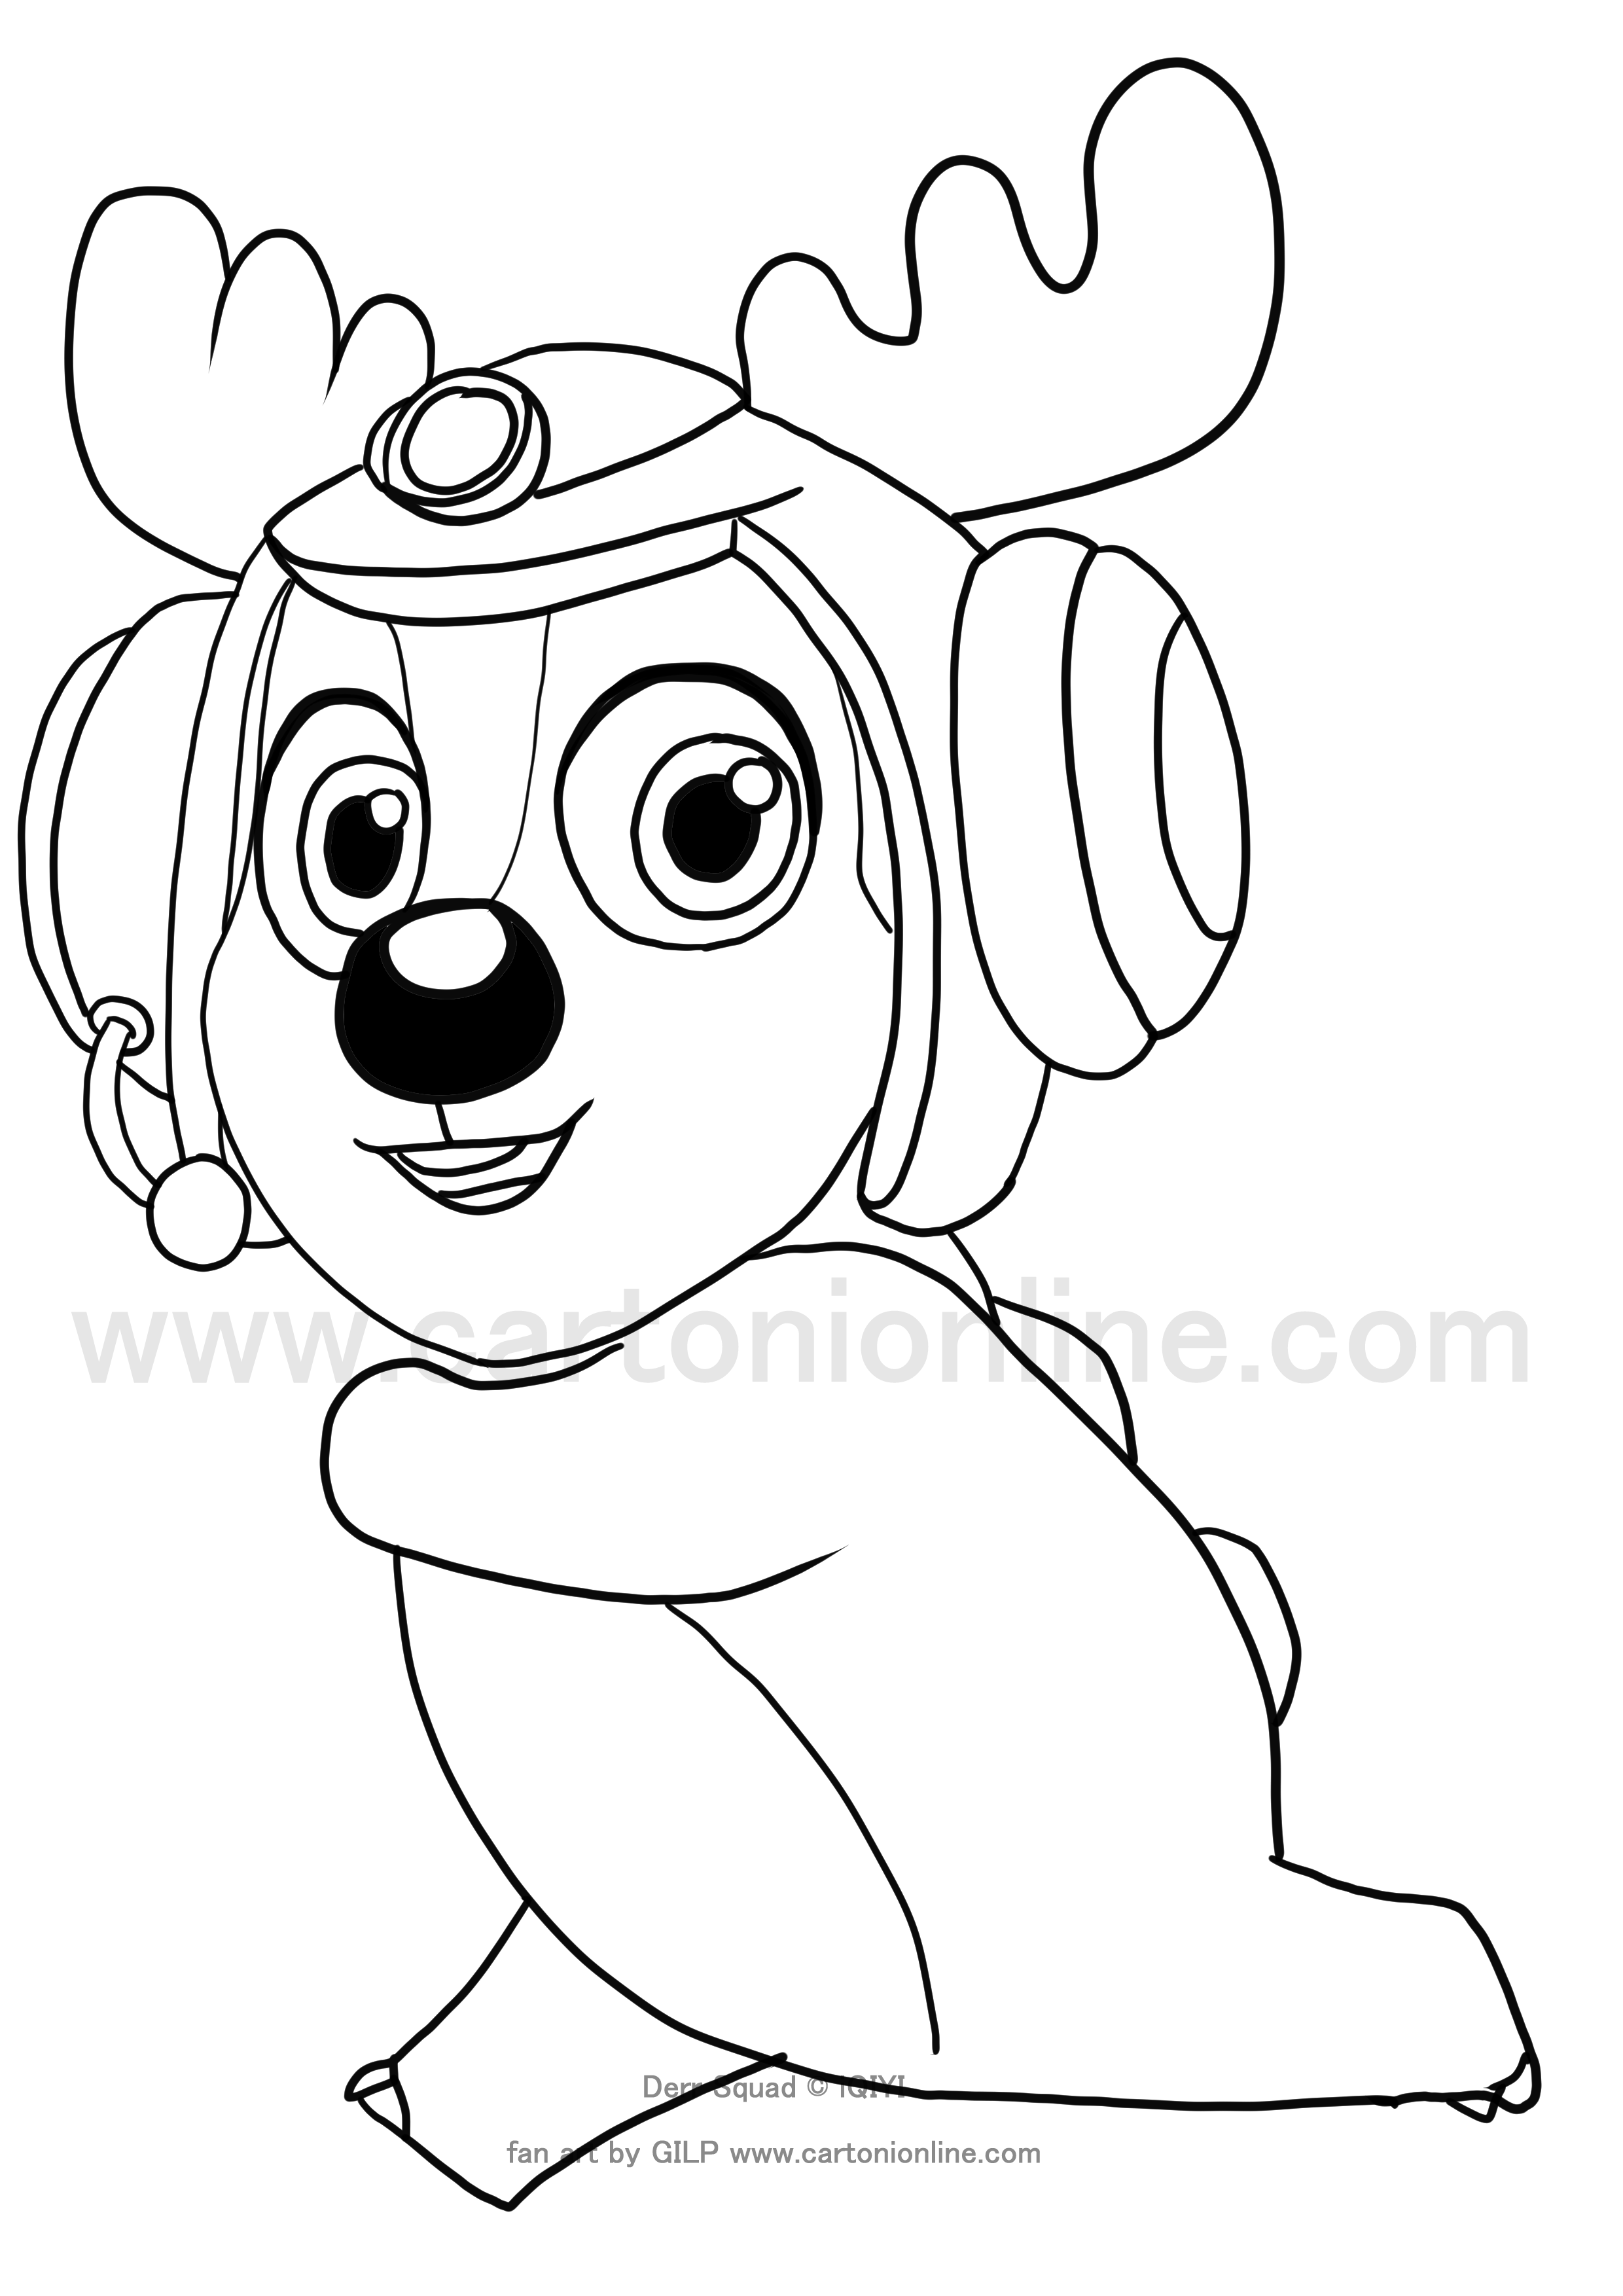 Bobbi from Deer Squad coloring page to print and coloring